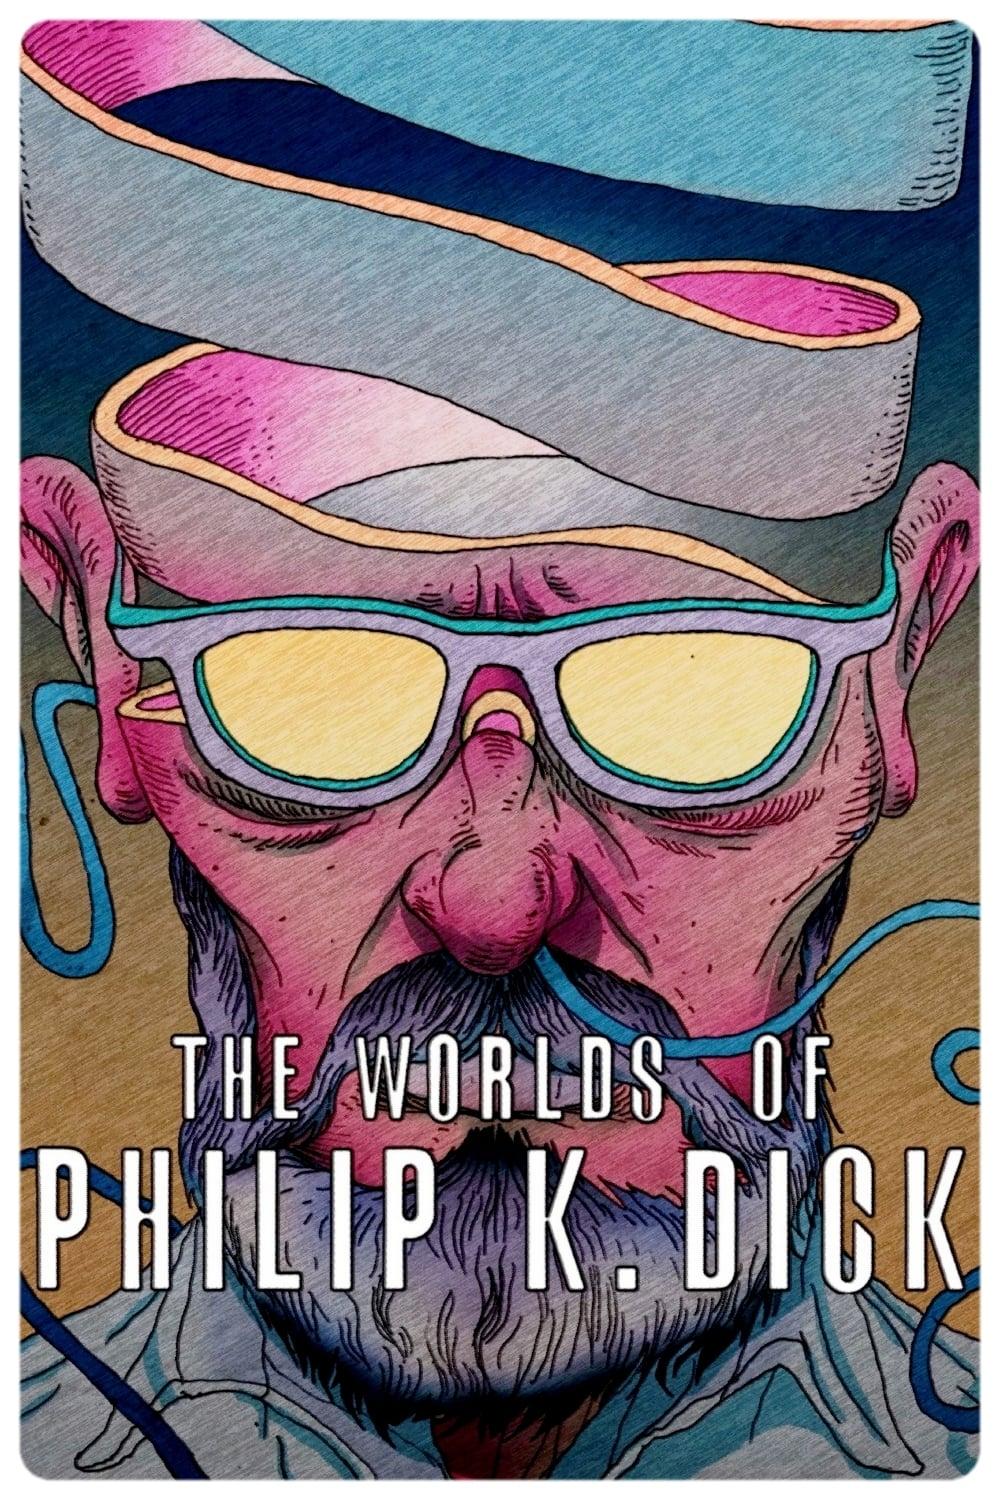 The Worlds of Philip K. Dick poster